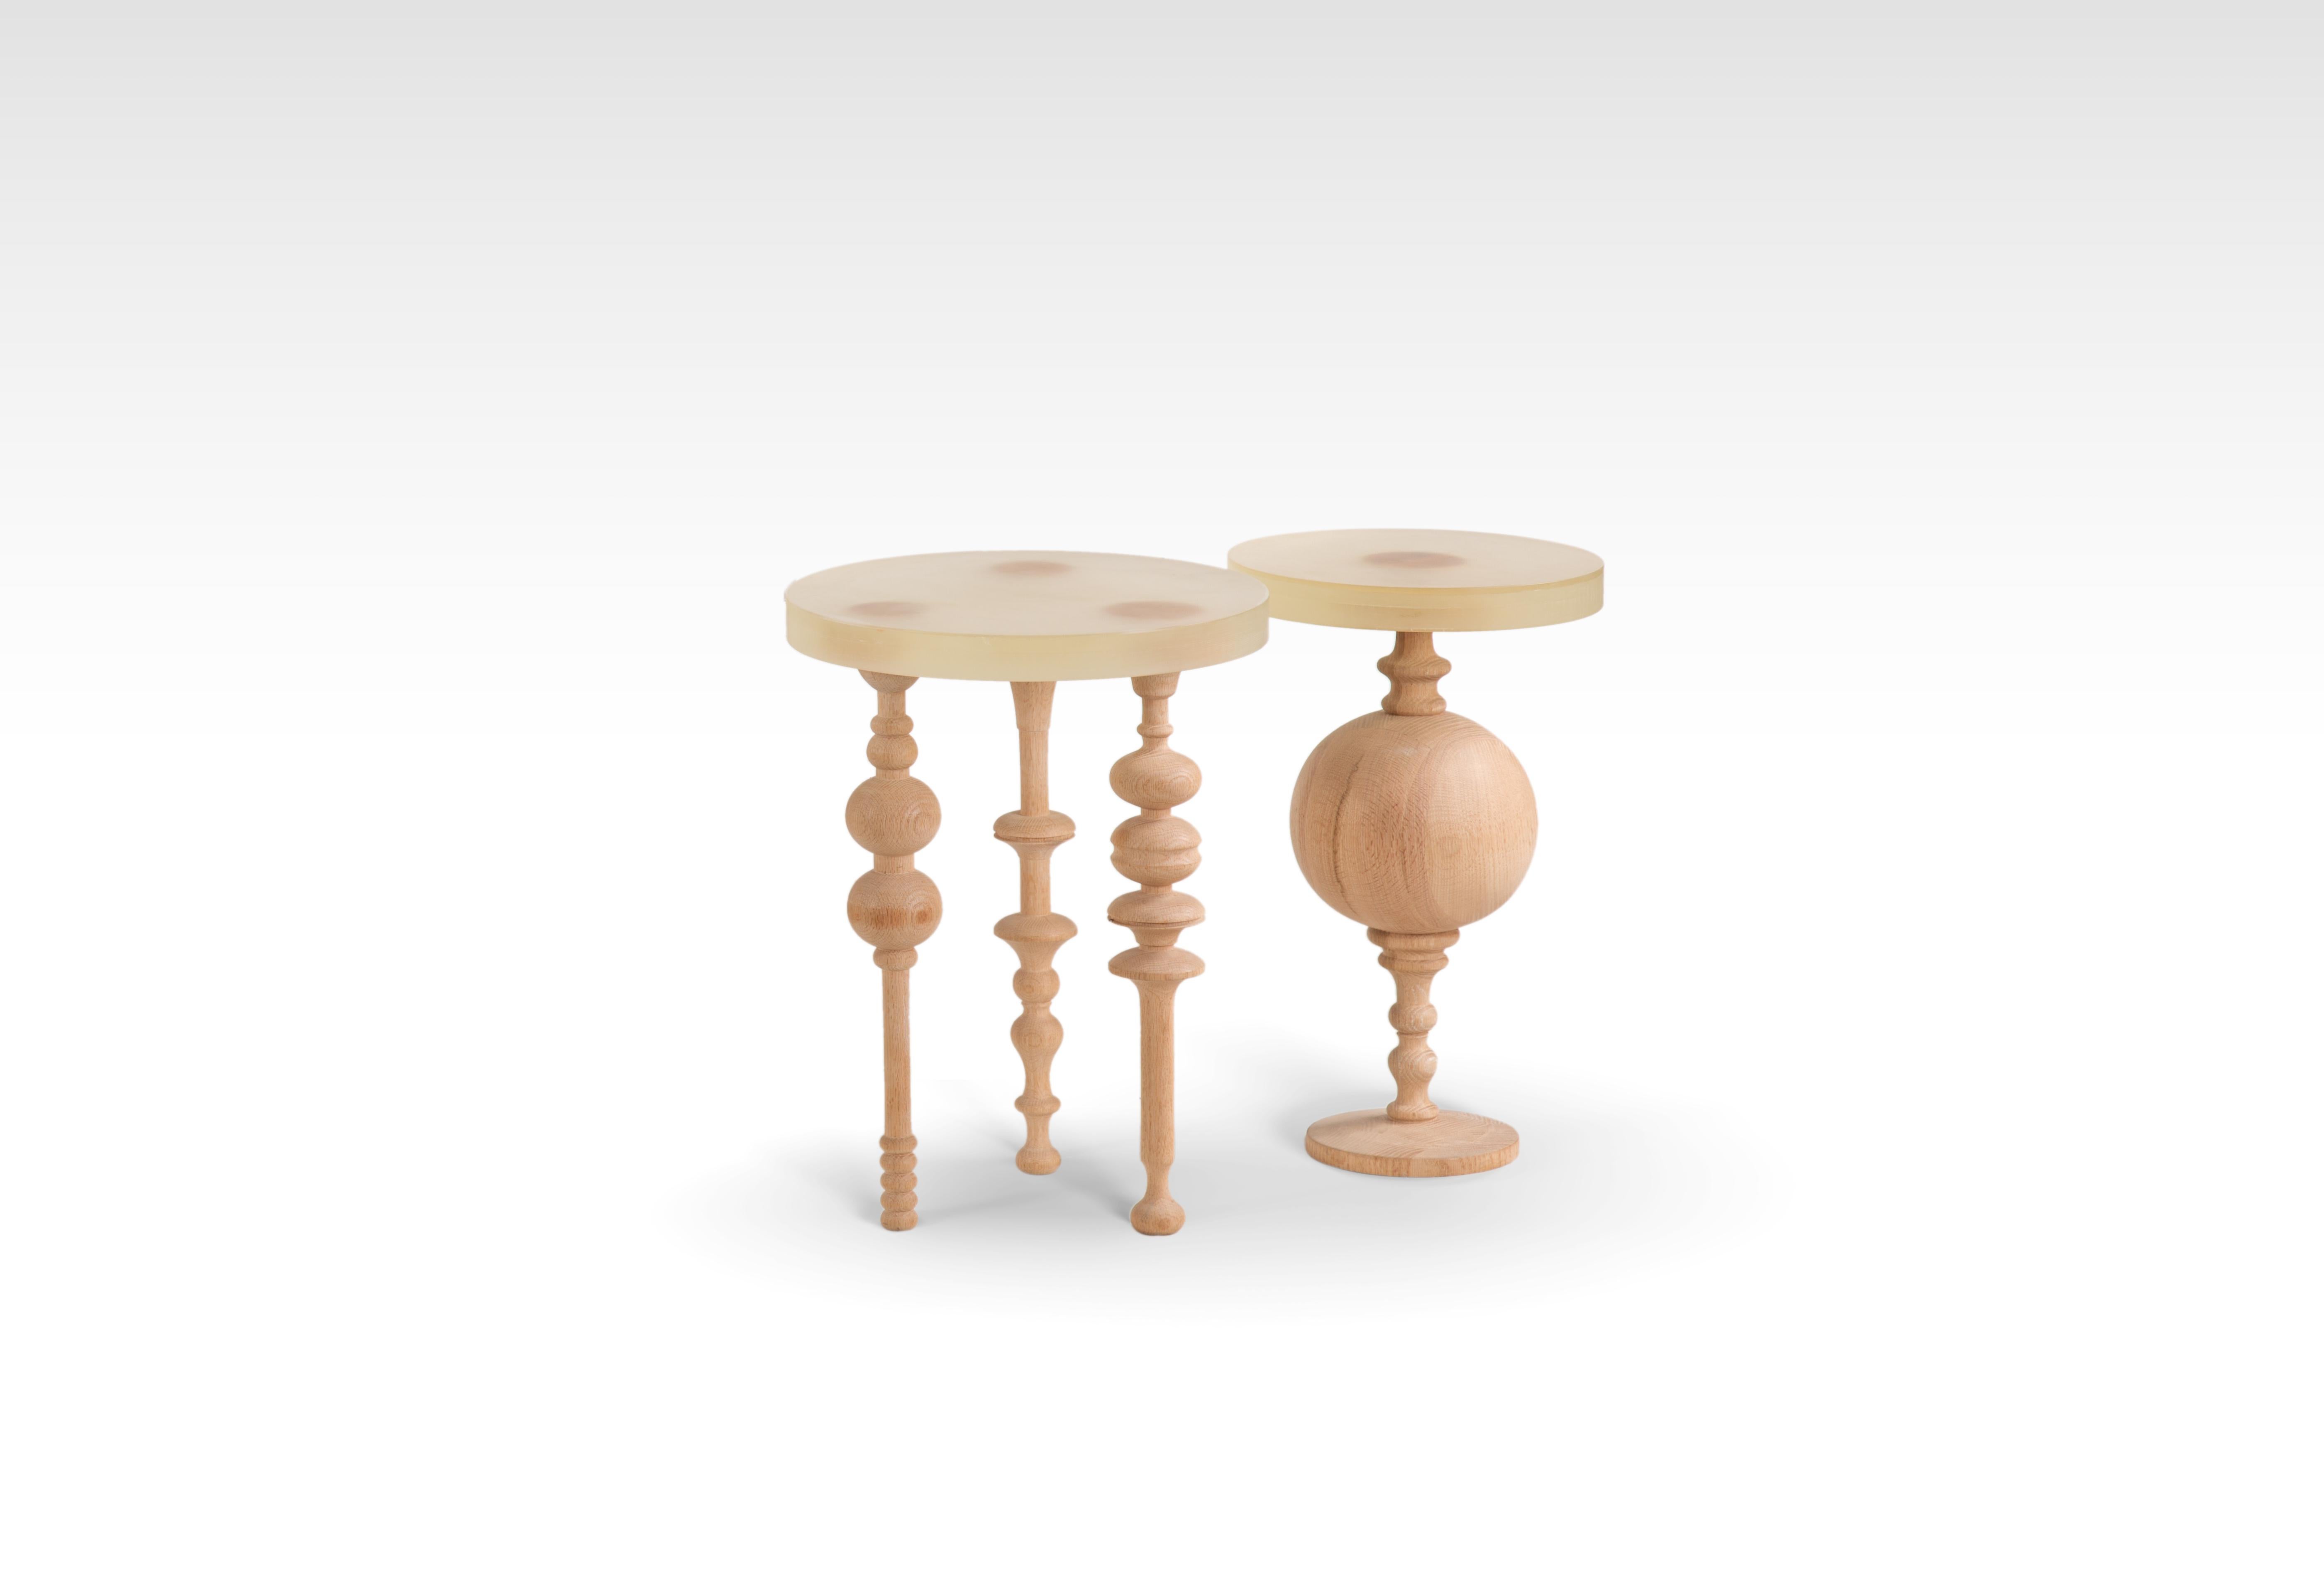 Arabesque-Inspired Oak Wood Side Table with Resin Top.
Our Funky Fusion is a classic side table with a contemporary flare that brings character to your living space. The table is made of Oak wood legs and resin top, giving it a raw and original look